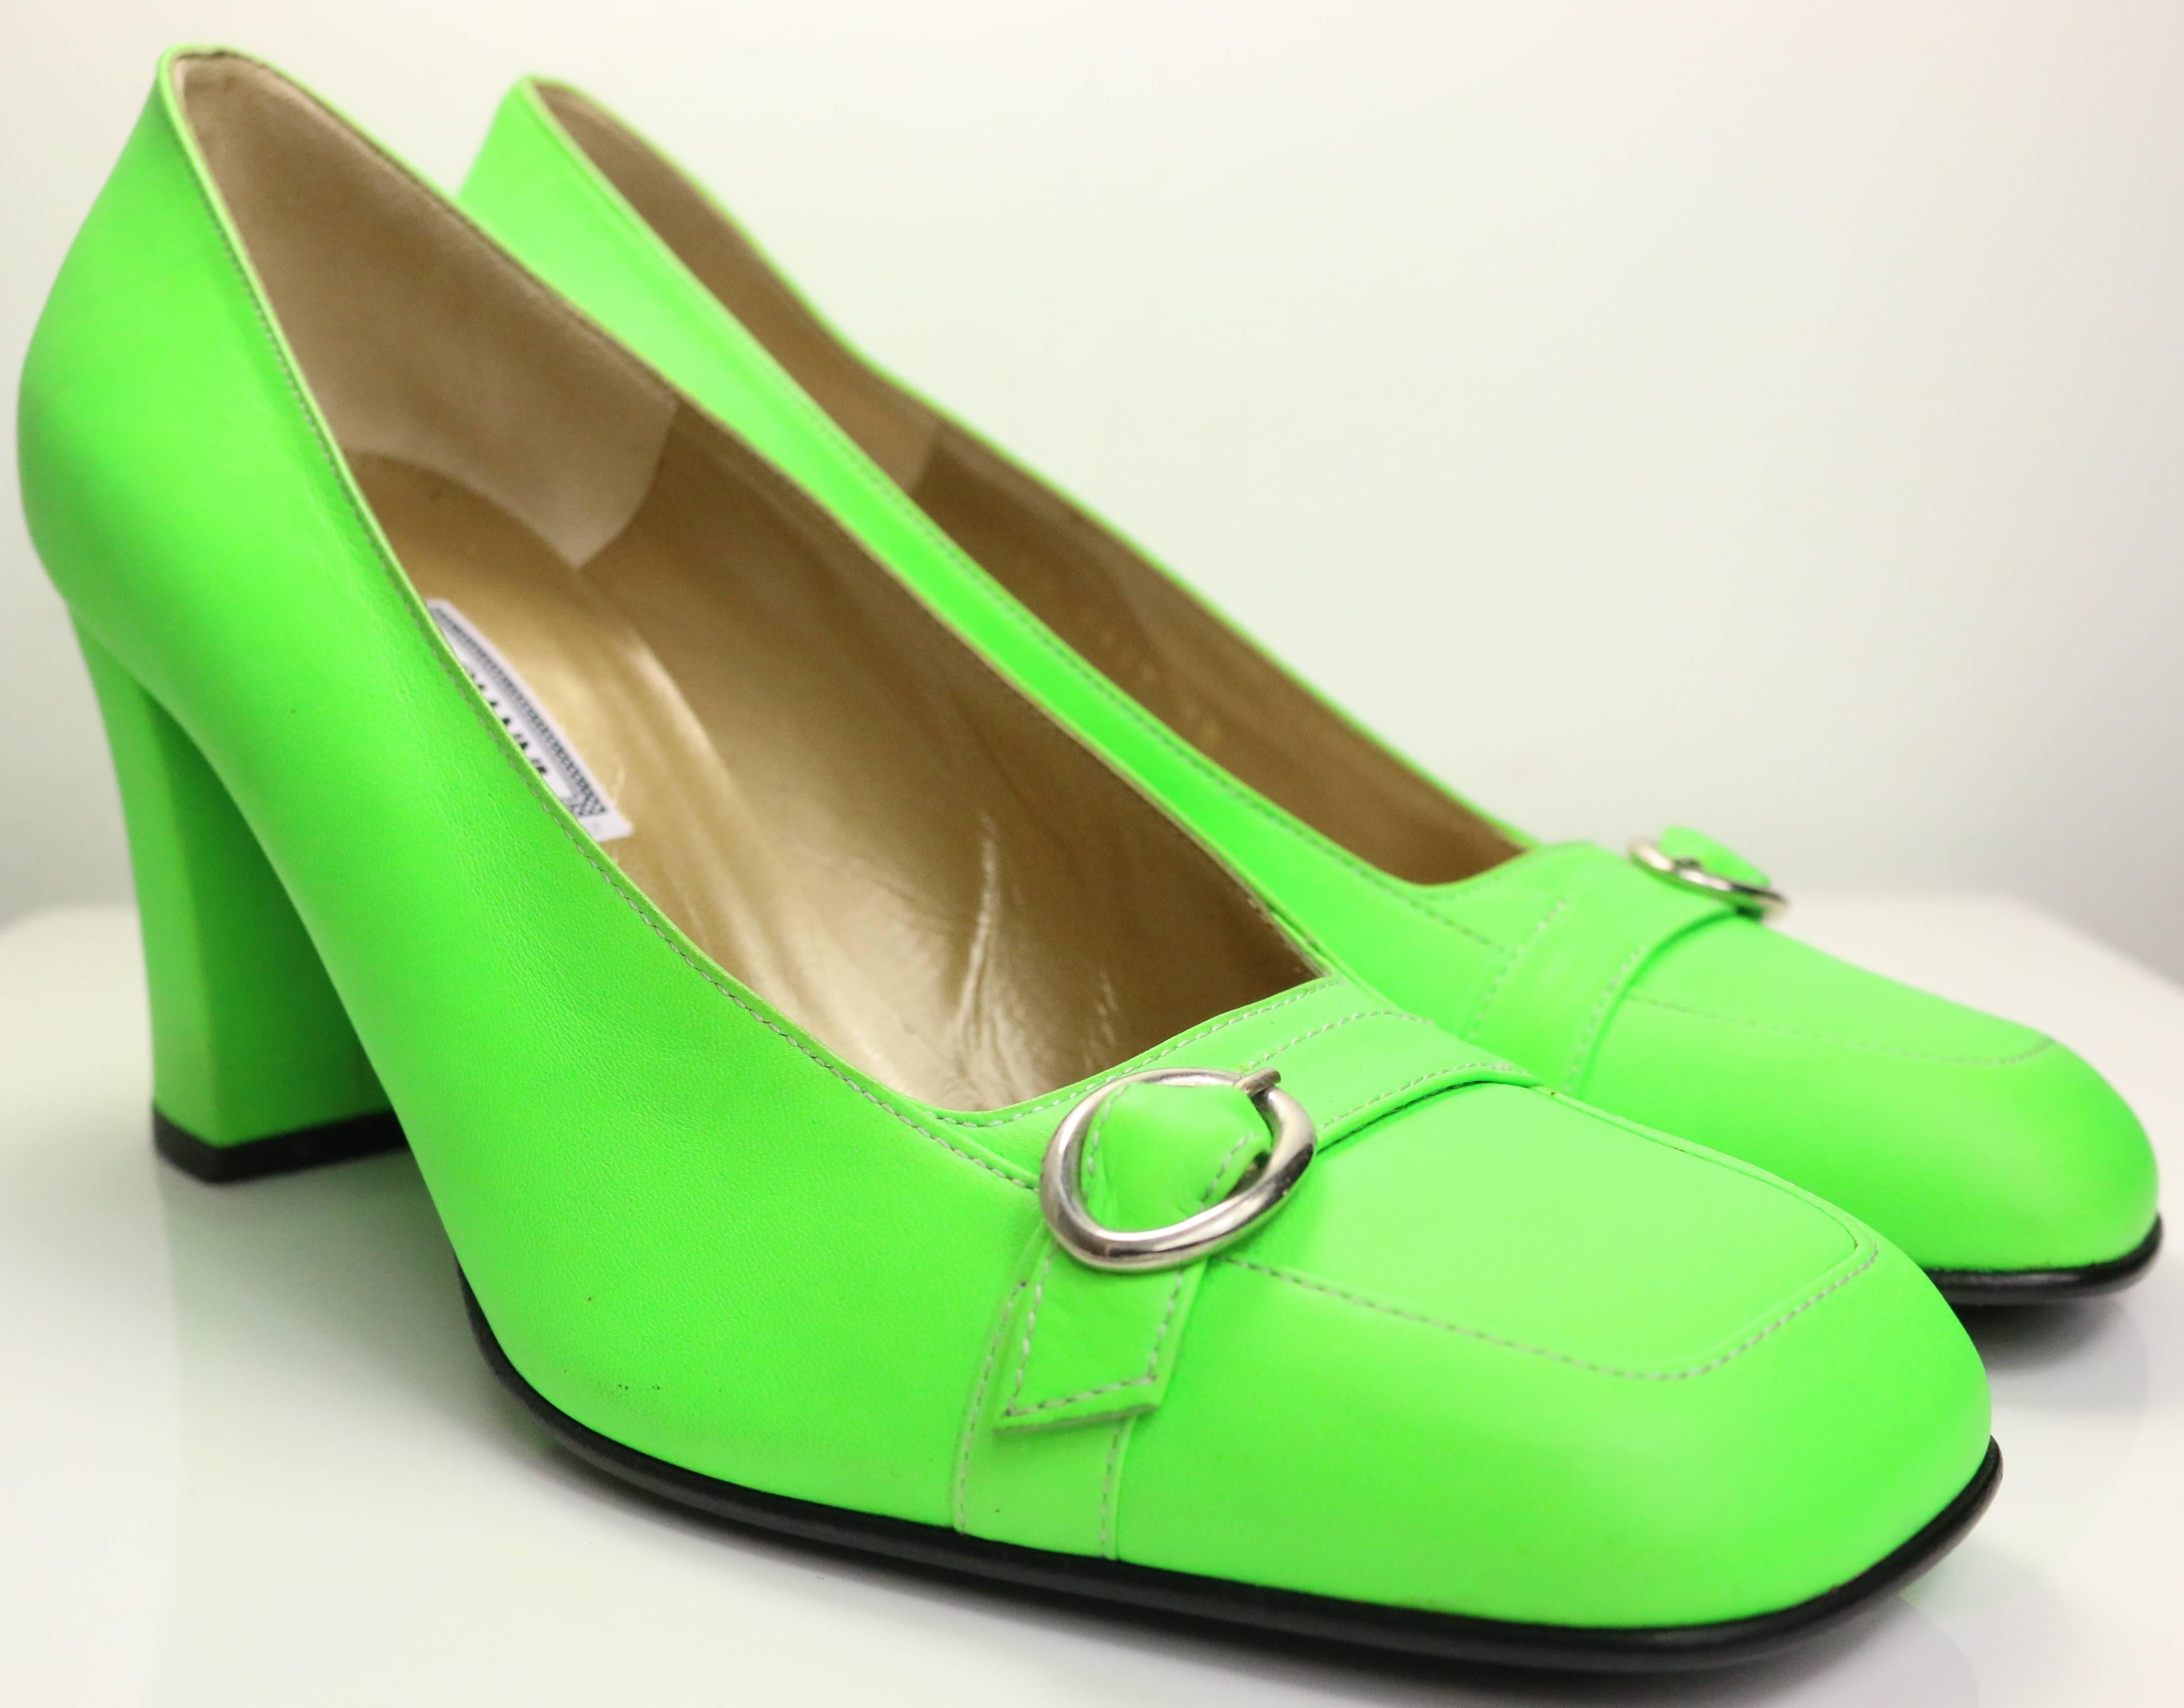 - Vintage 90s Gianni Versace neon green leather square toe heels with buckle details in front. 

- Size 38. 

- Made in Italy. 

